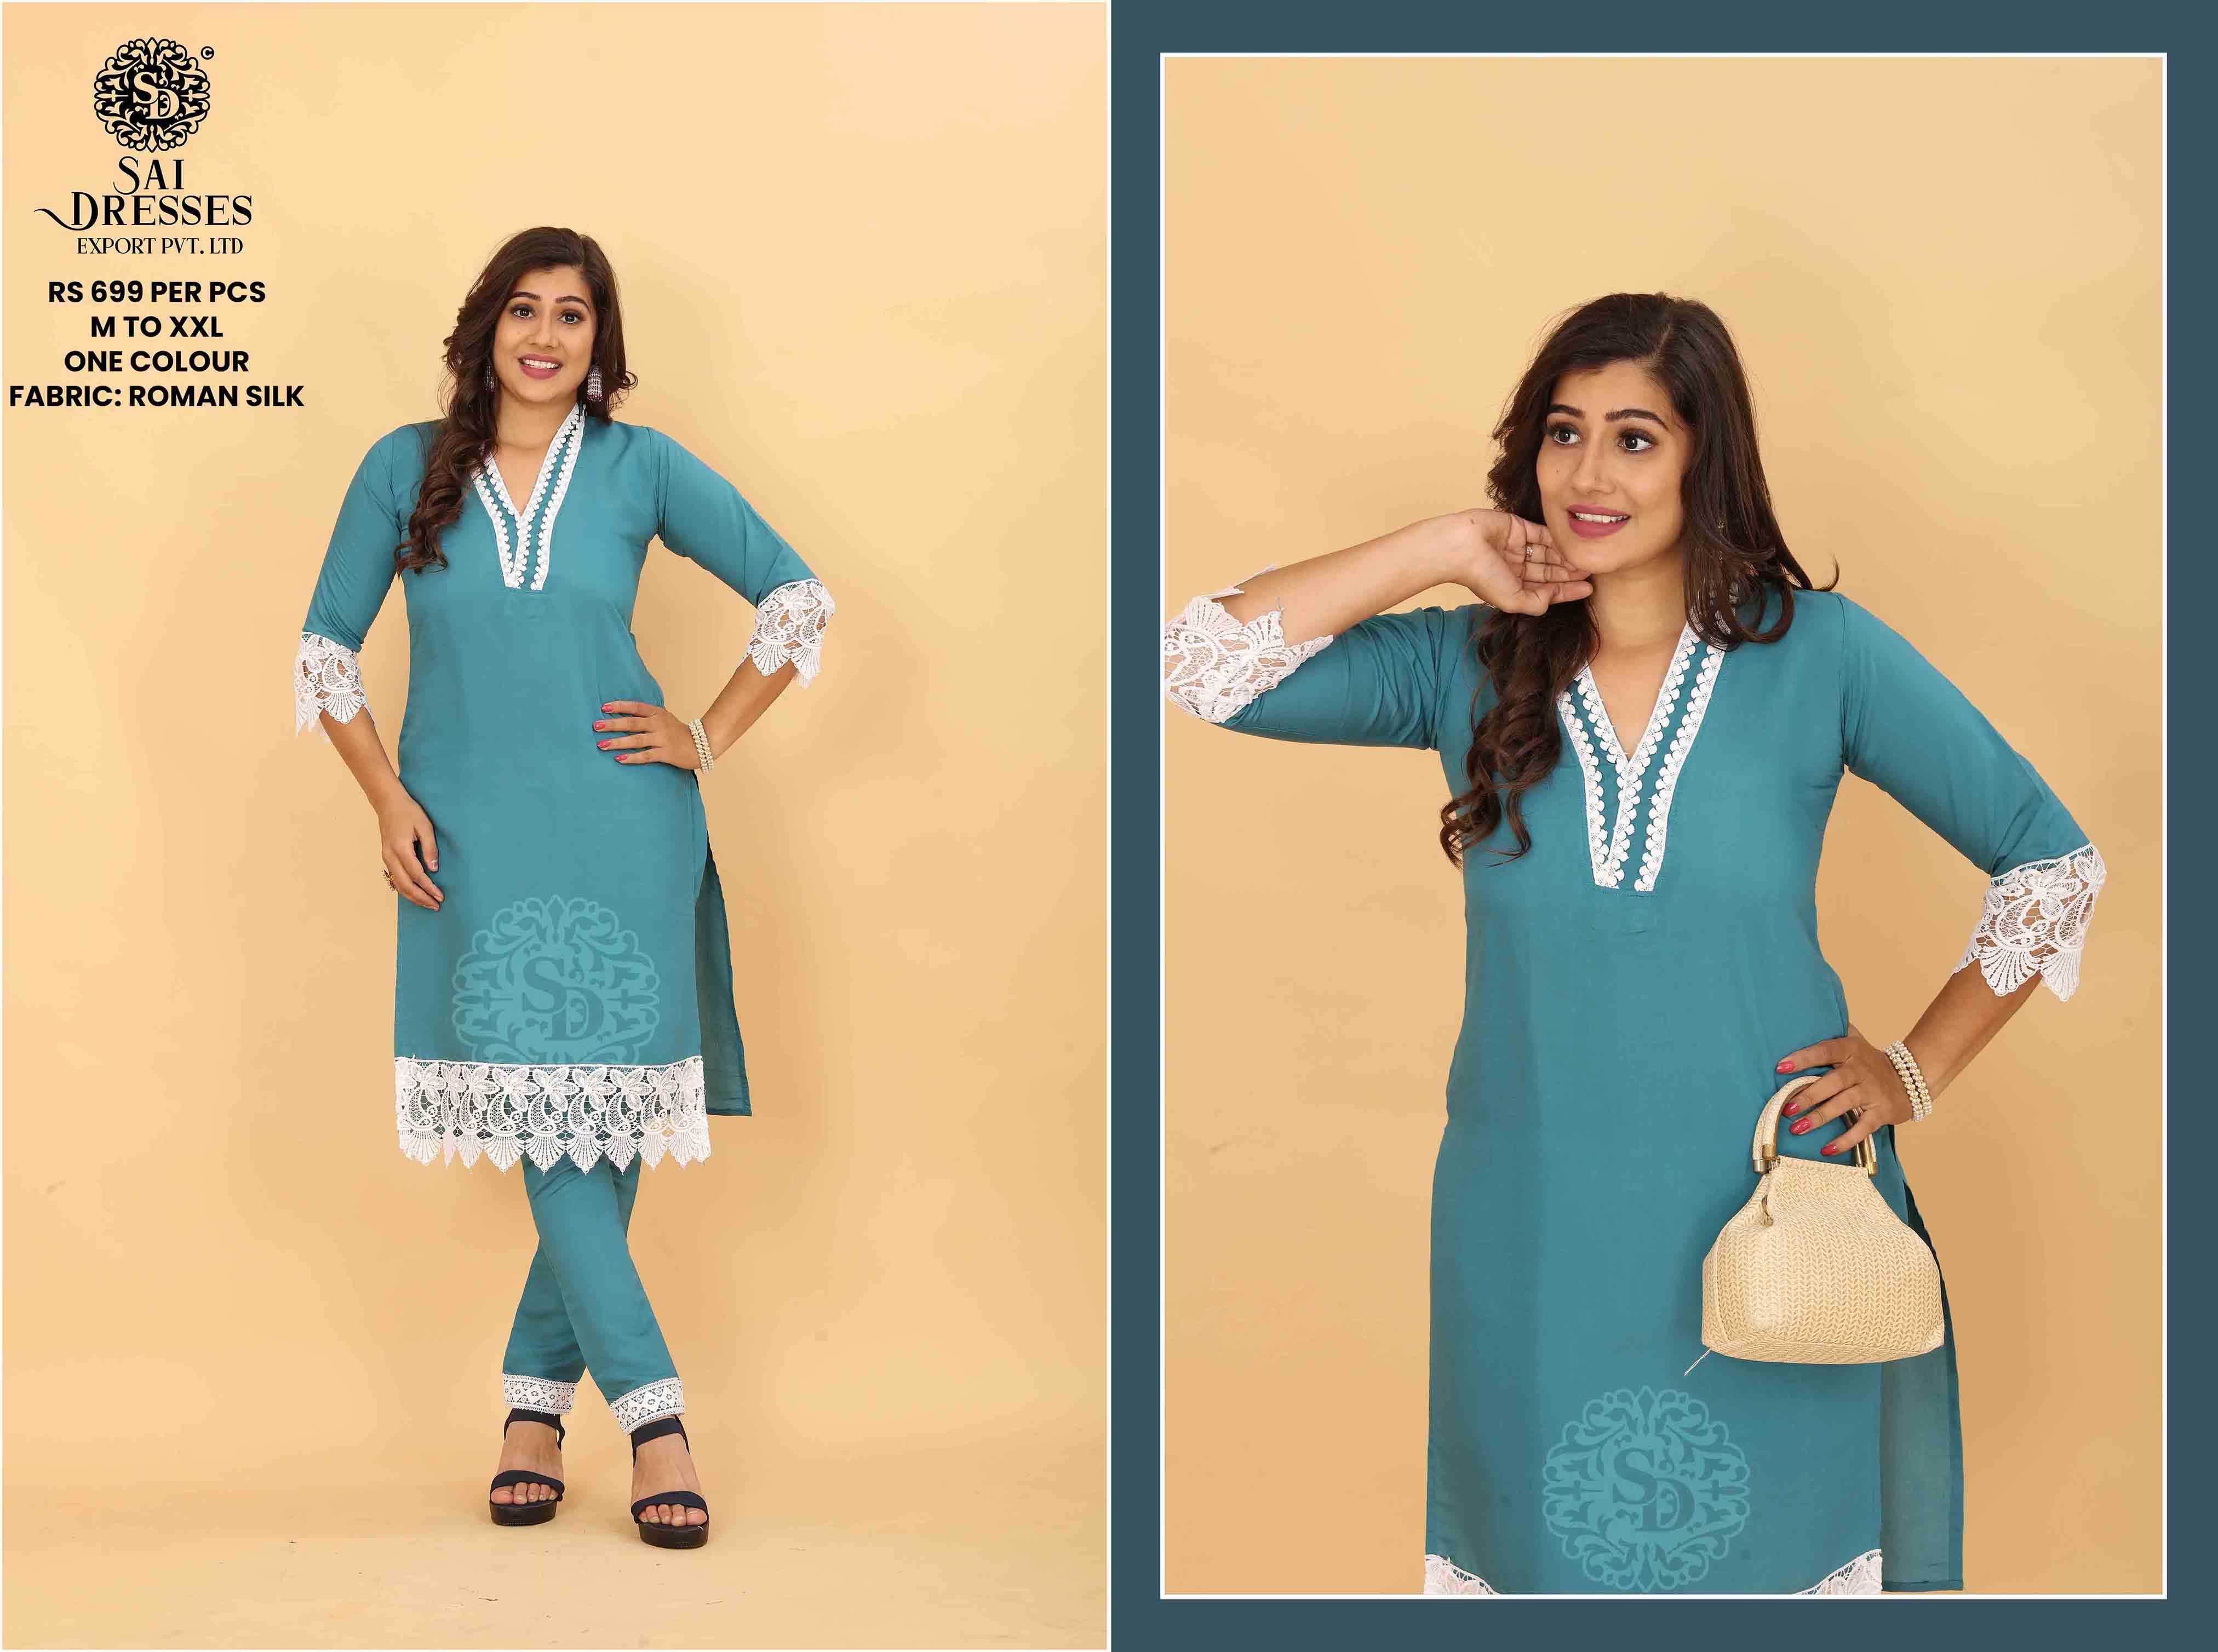 SAI DRESSES PRESENT D.NO SD 5005 READY TO TRENDY WEAR ROMAN SILK DESIGNER KURTI WITH PANT COMBO COLLECTION IN WHOLESALE RATE IN SURAT